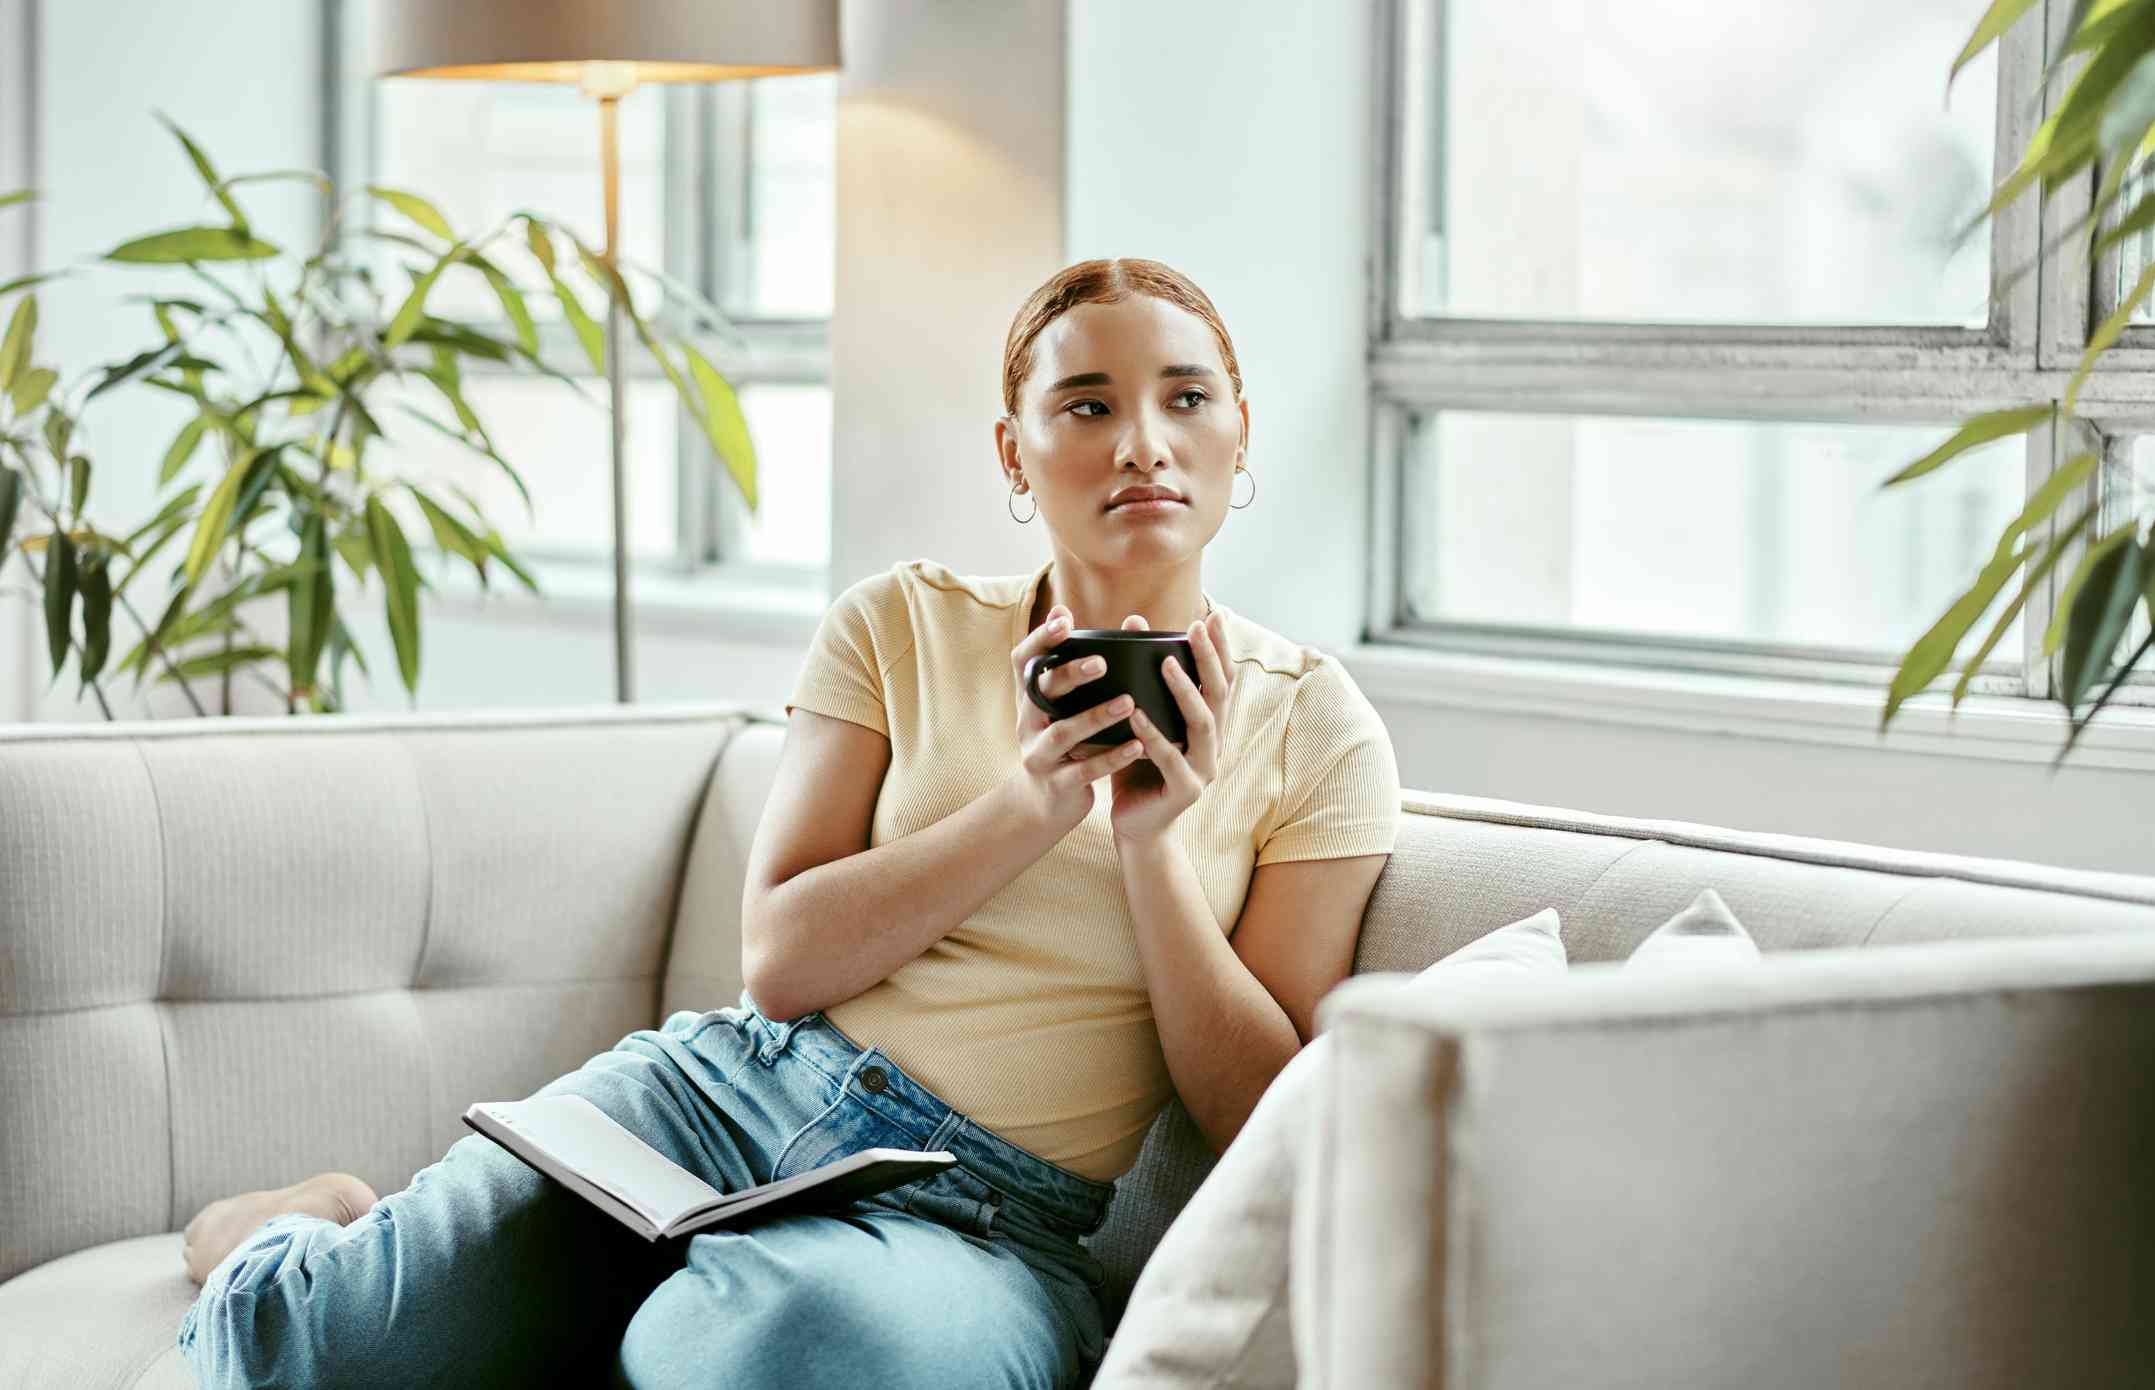 A woman in a yellow shirt sits on the couch with a mug of coffee in her hands as she gazes off sadly.